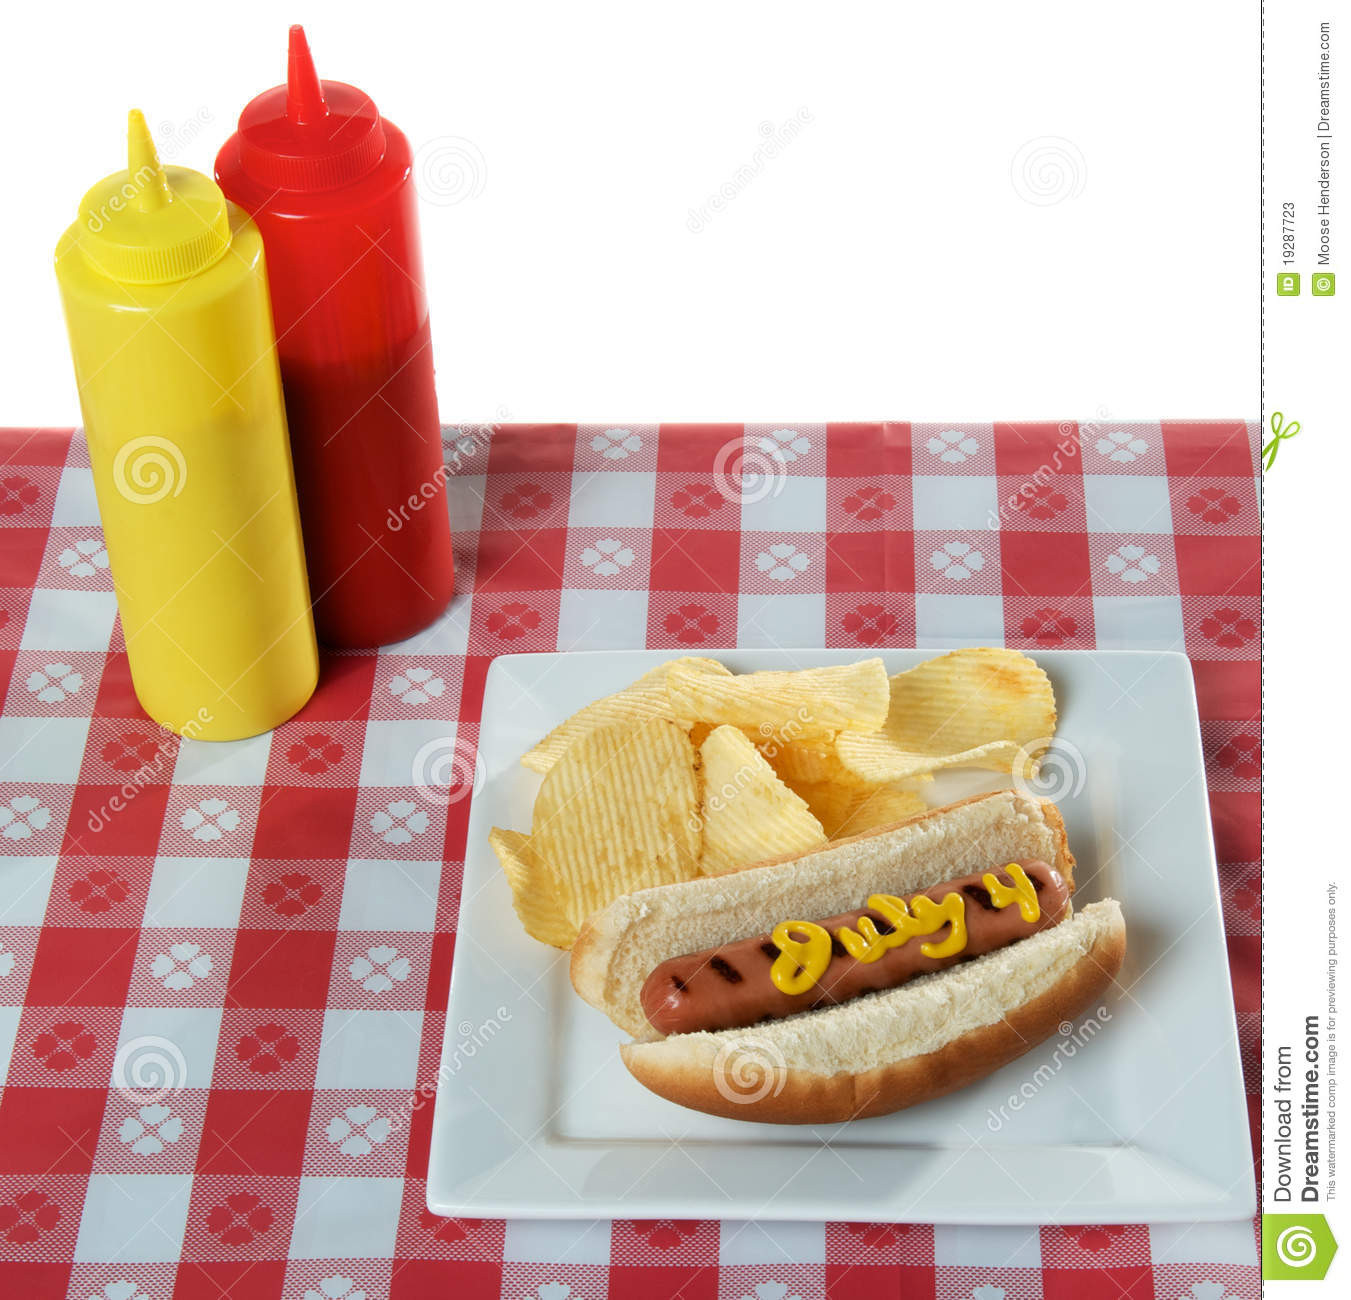 4Th Of July Hot Dogs
 July 4th Independence Day Hot Dog Stock s Image